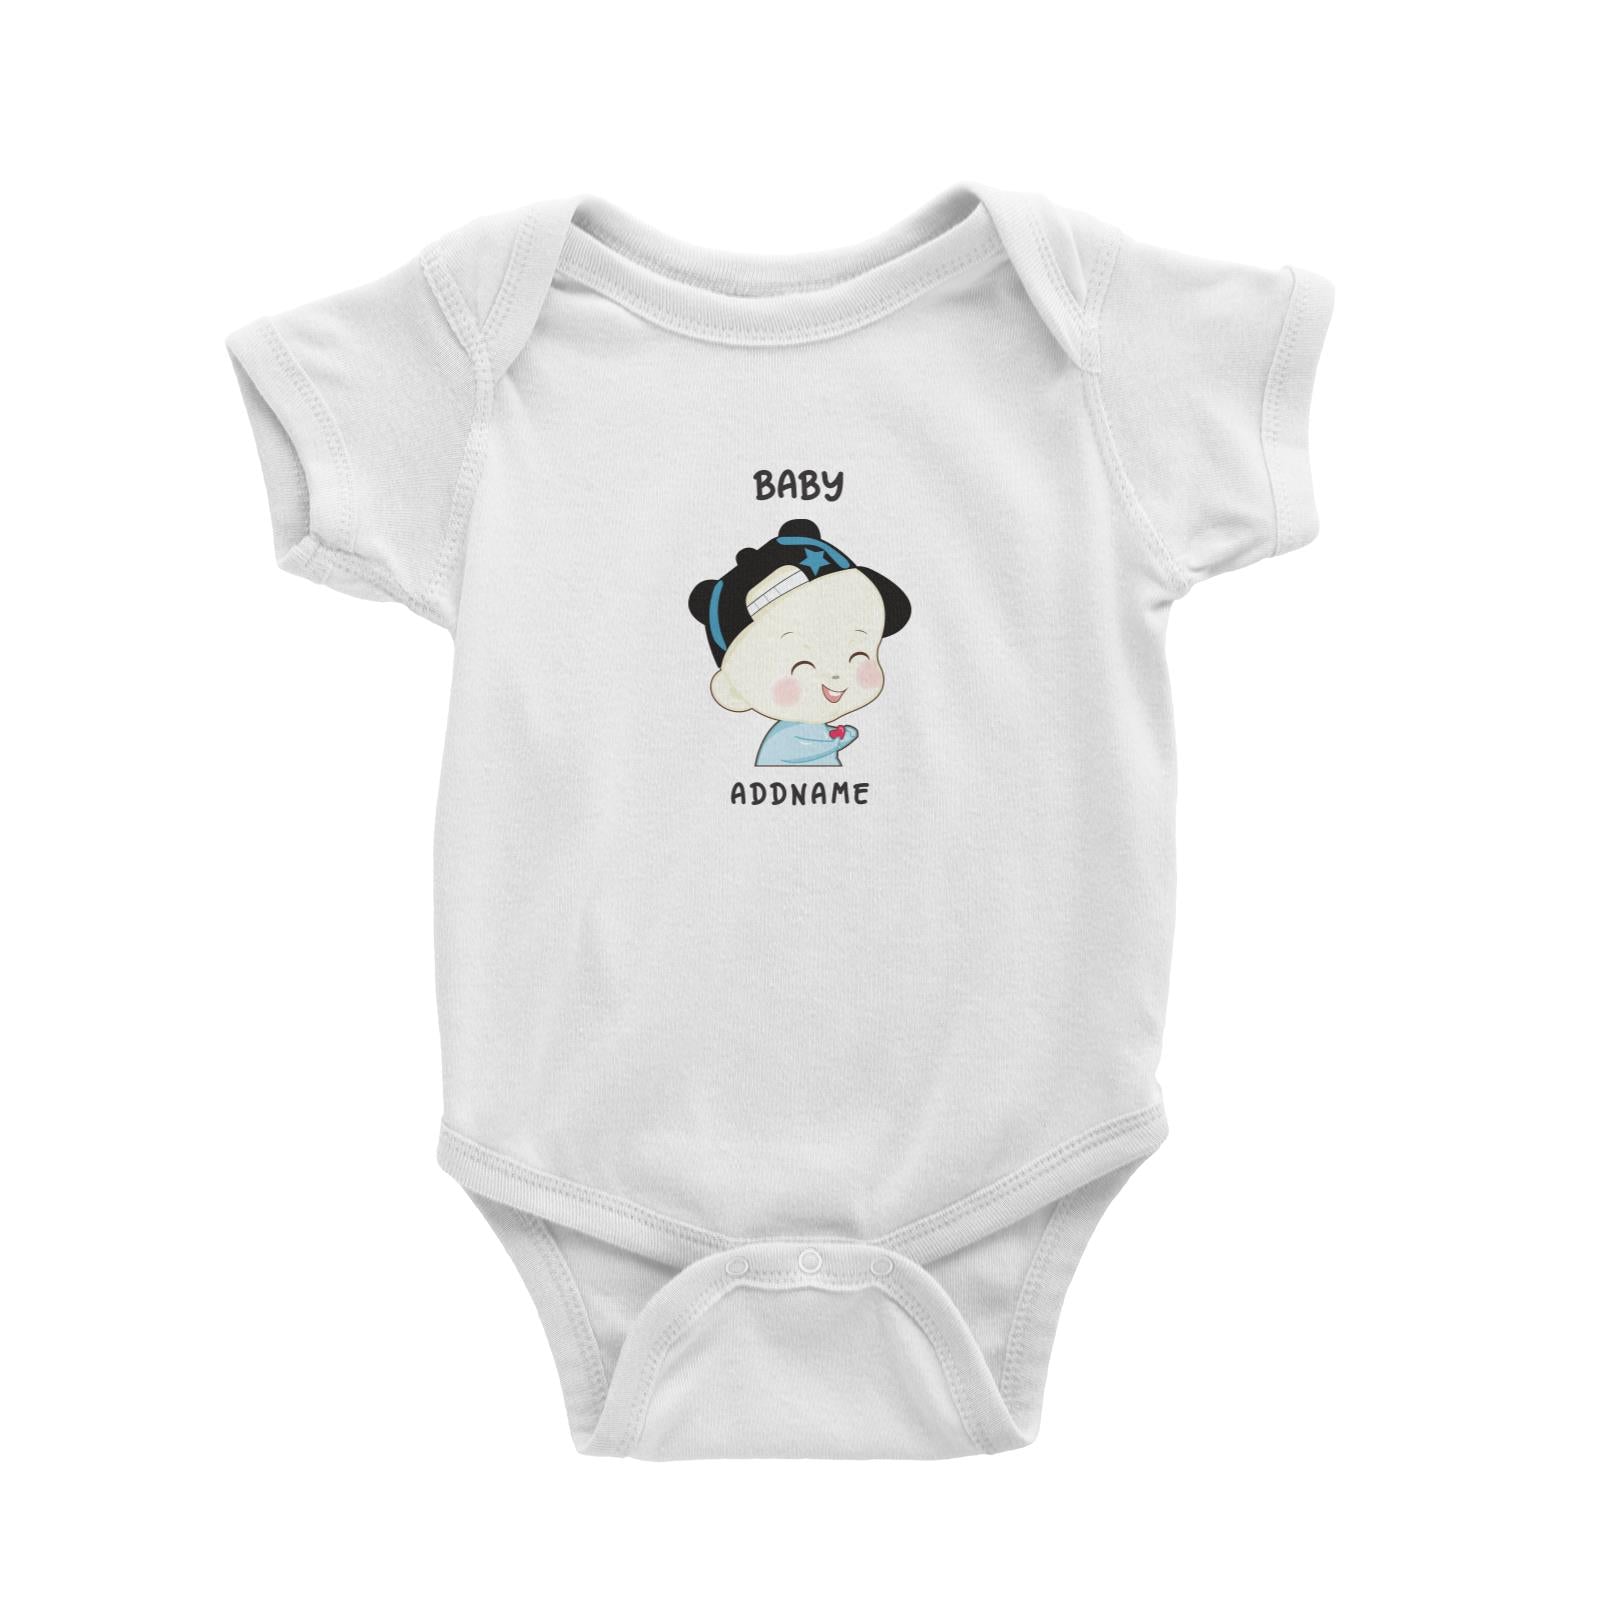 My Lovely Family Series Baby Boy Addname Baby Romper (FLASH DEAL)